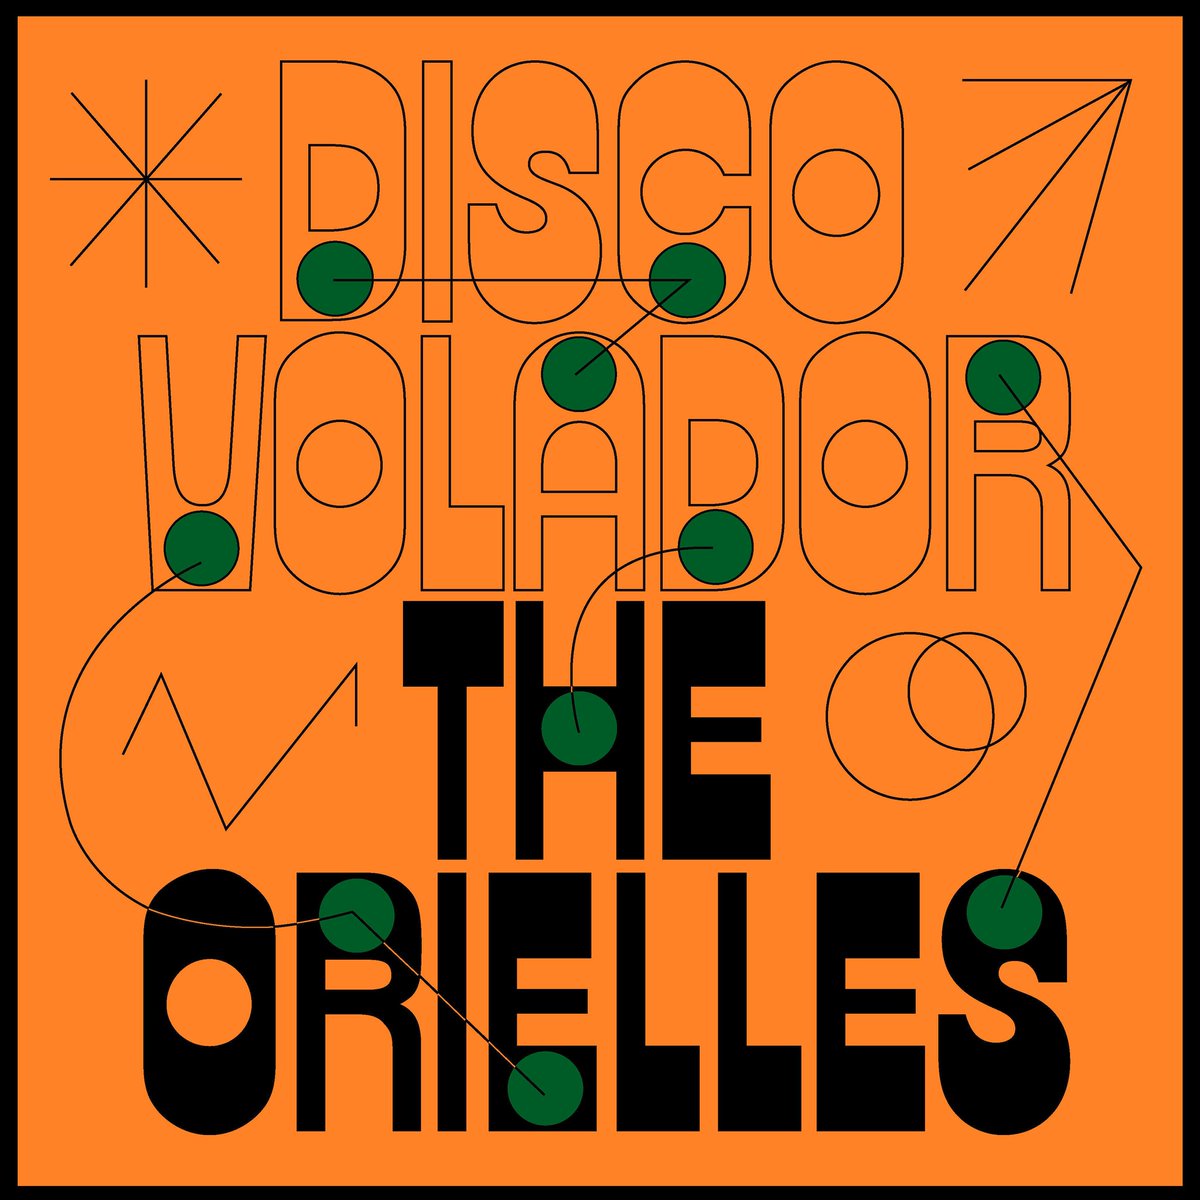 39. Disco Violator - The Orielles.I didn't play this album lots, but I still enjoyed it + felt duty bound to give them a spot here as they were the only artist I saw live this year. Best tracks:Whilst The Flowers LookA Material MistakeEuro BorealisCome On Jupiter